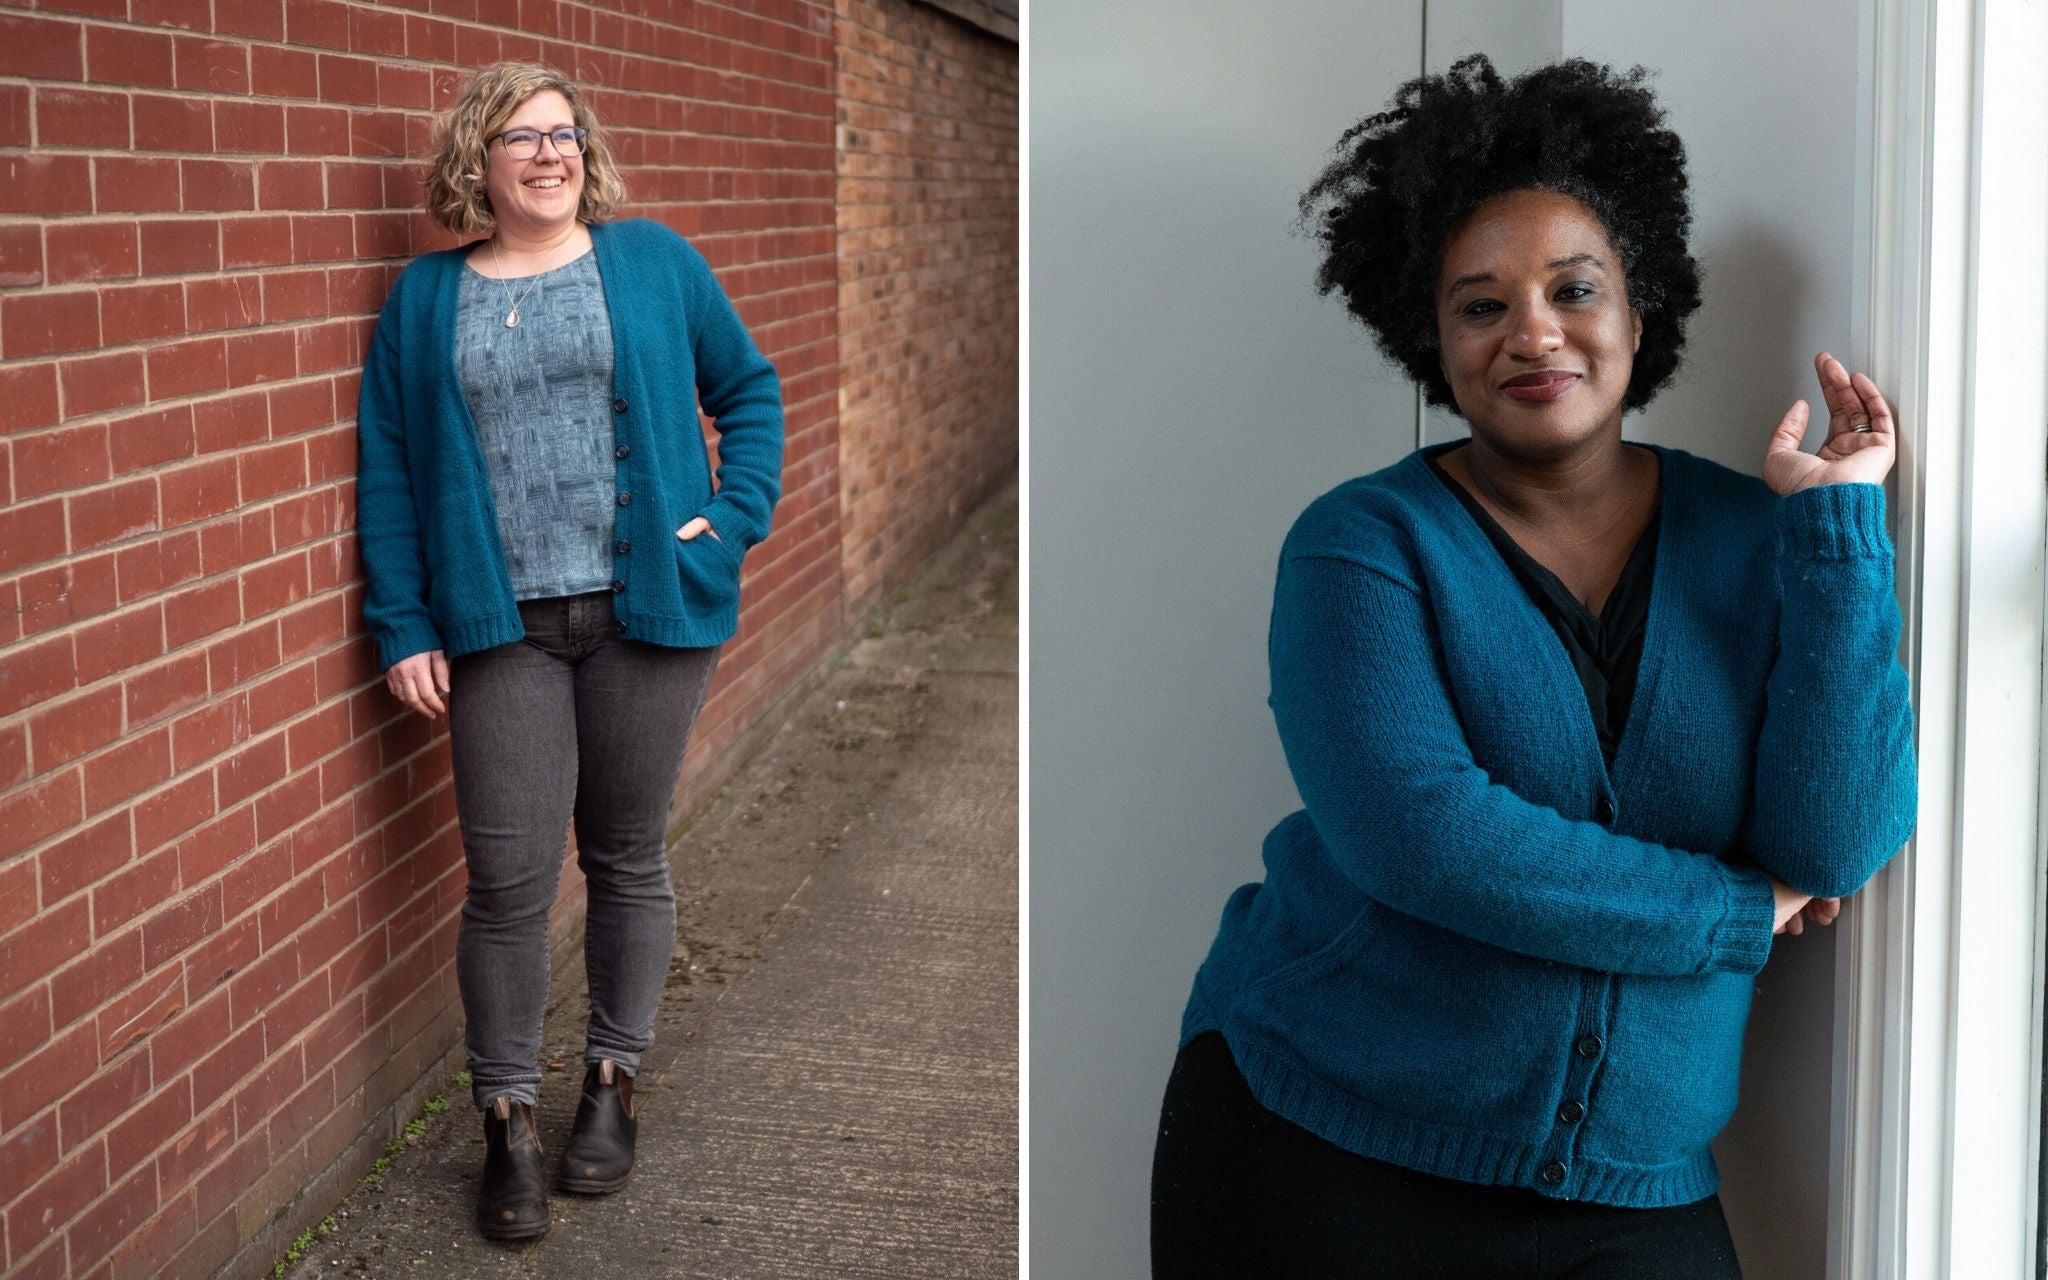 Two images. Image on left a white woman leans against a brick wall, she's got blond chin length curly hair and glasses. She's wearing dark grey jeans, a tshirt, and a blue cardigan open it has pockets. Image on the right a black woman with an afro leans against a wall wearing the same cardigan over a black t-shirt.